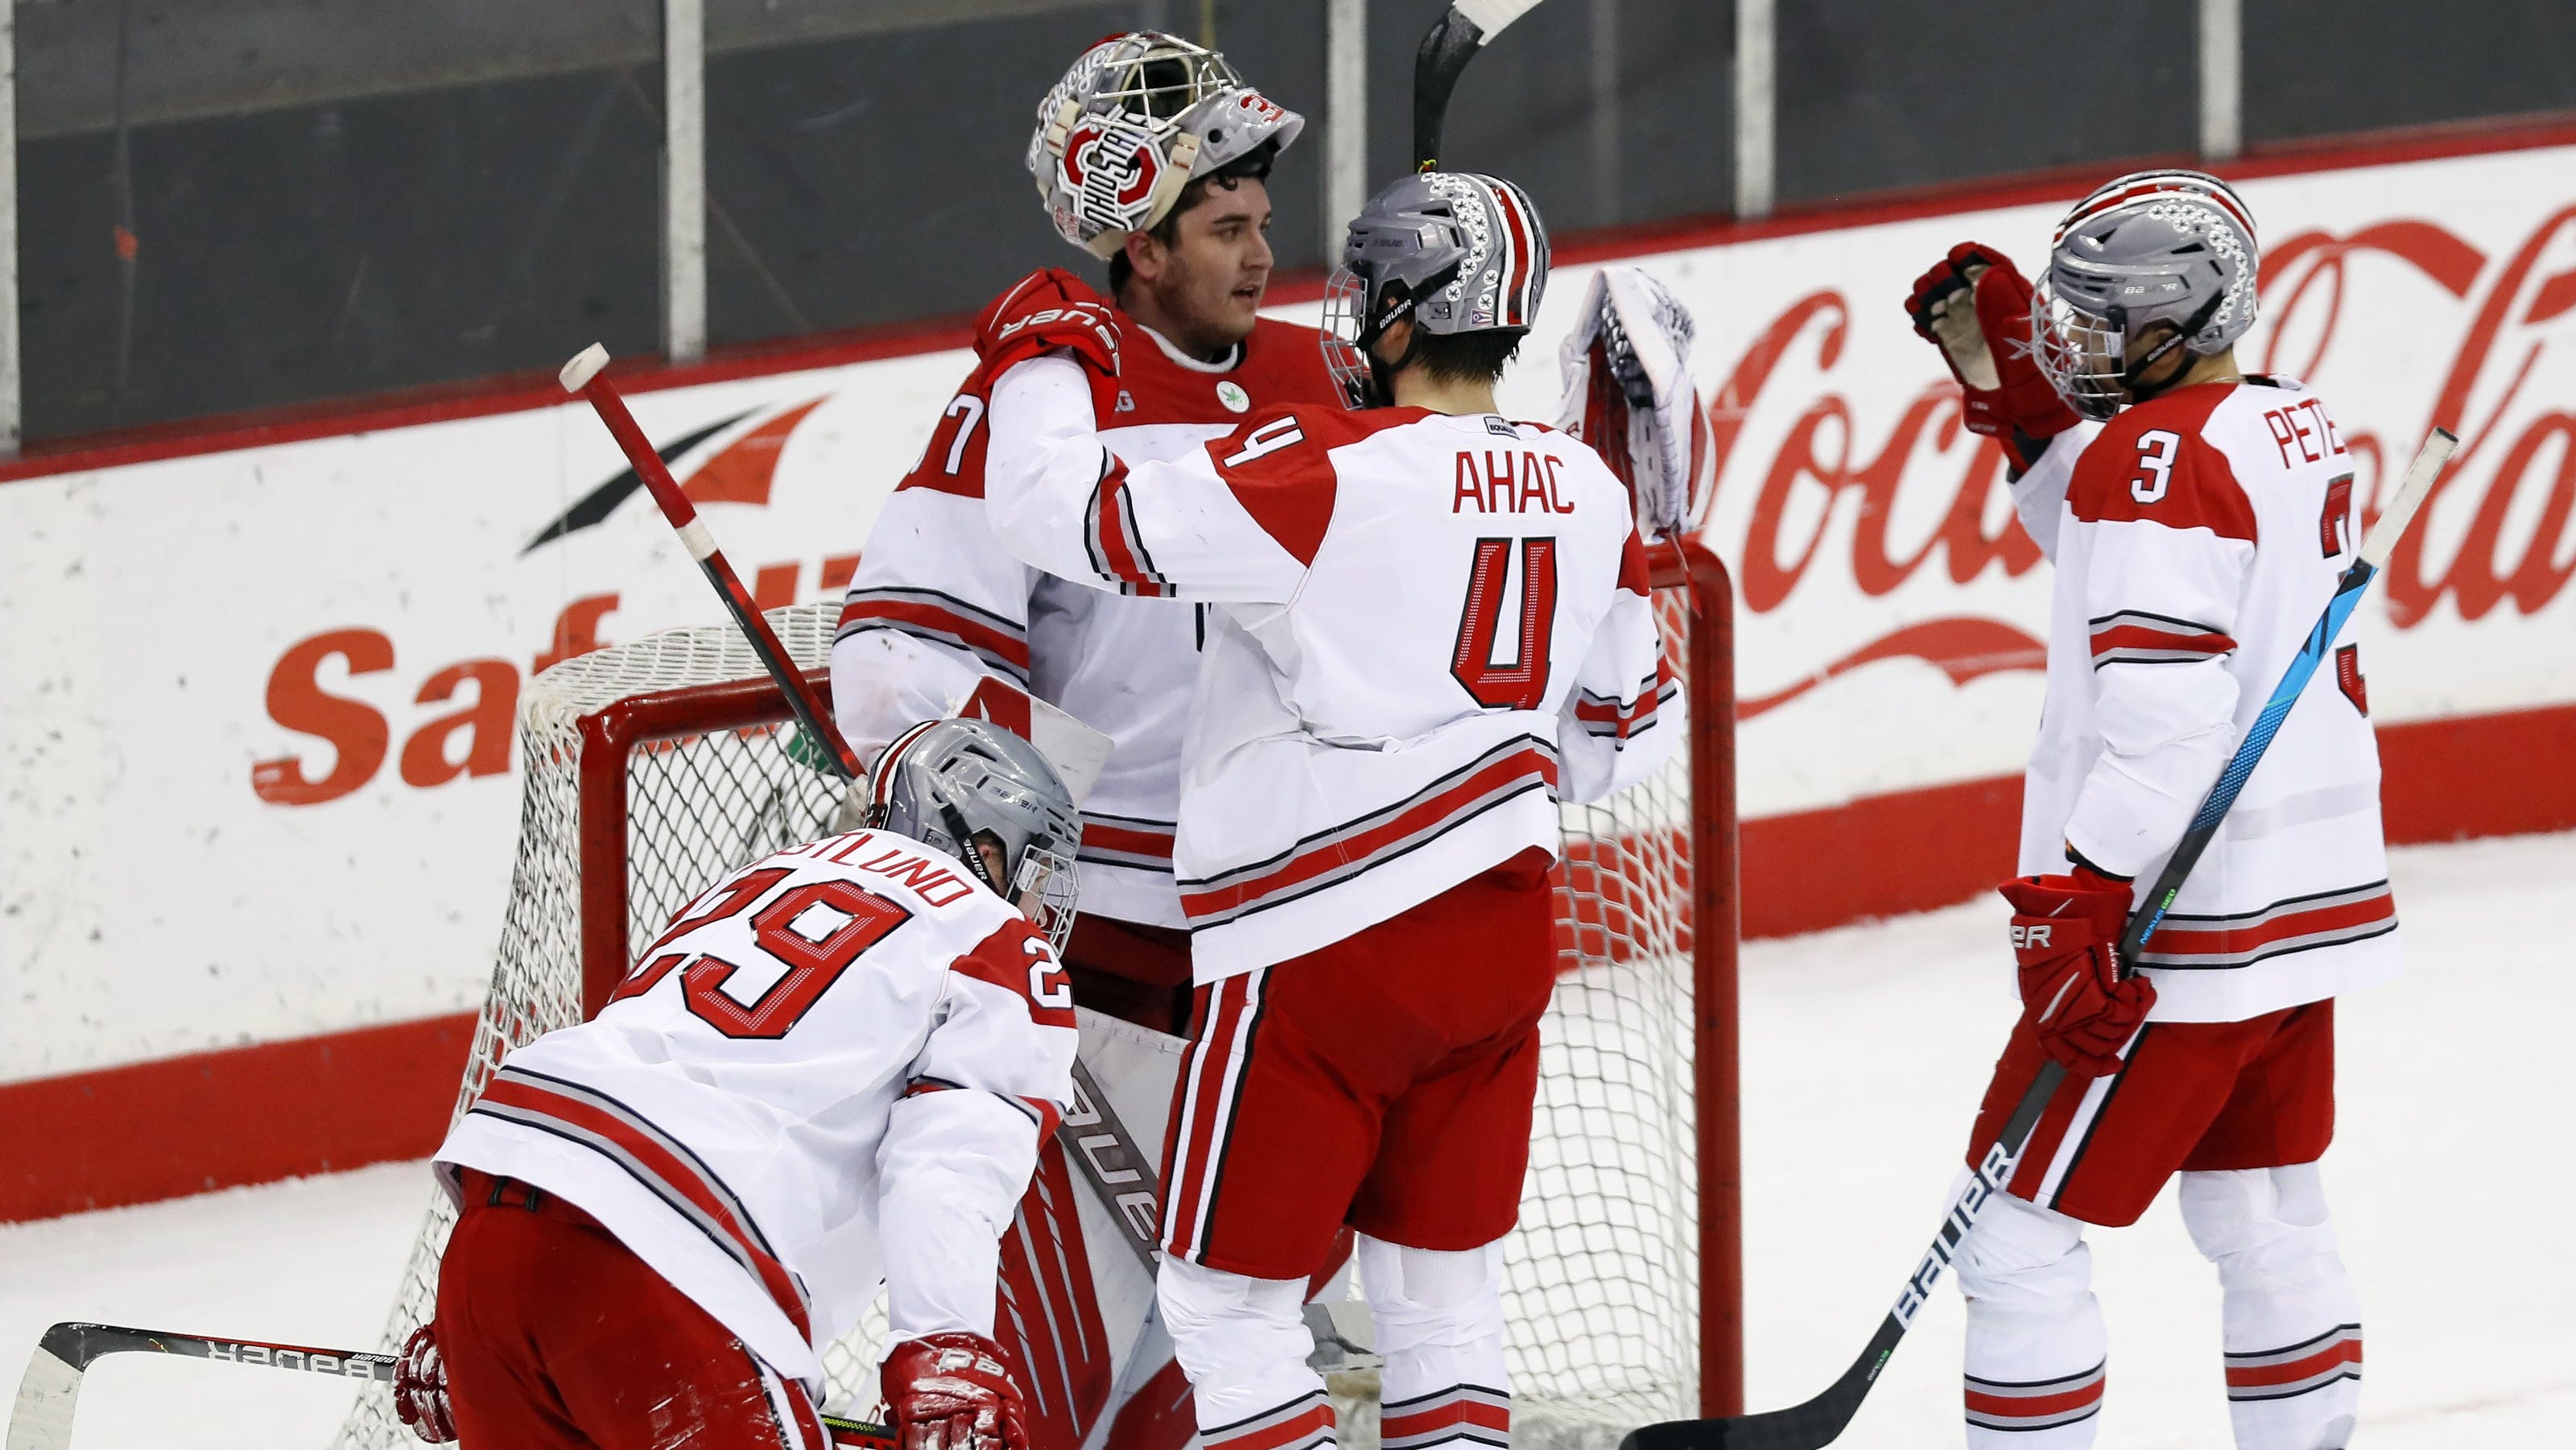 Ohio State men's hockey team is working through a difficult season